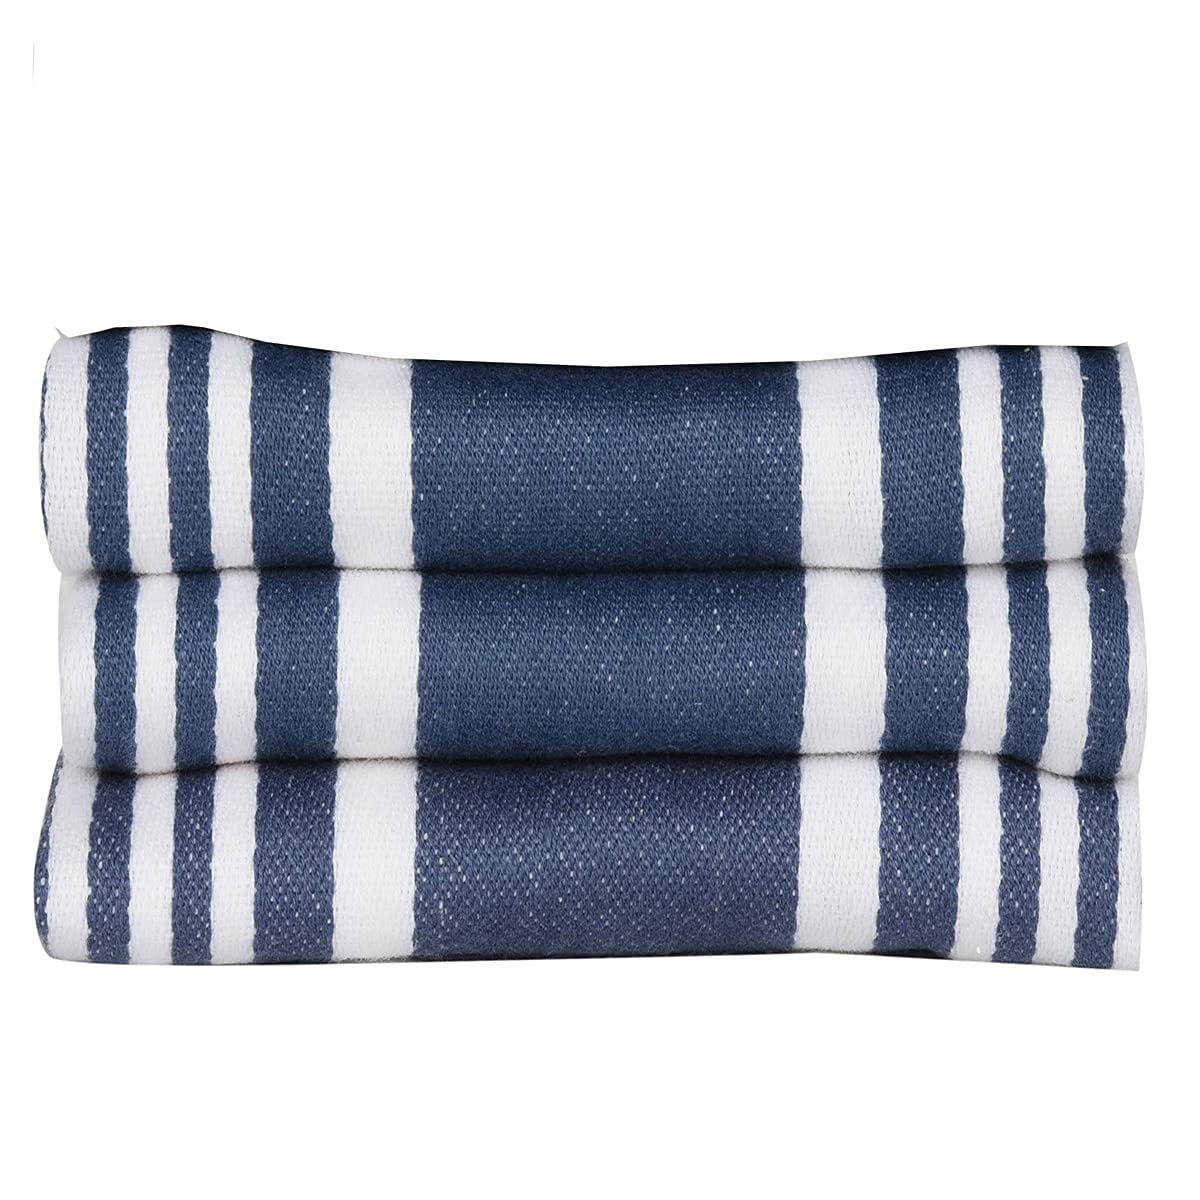 Urban Villa Kitchen Towels Multi Color Set of 6 Terry Kitchen Towels 100%  Cotton Ultra Soft Size 20X30 Inches Highly Absorbent Over Sized Kitchen